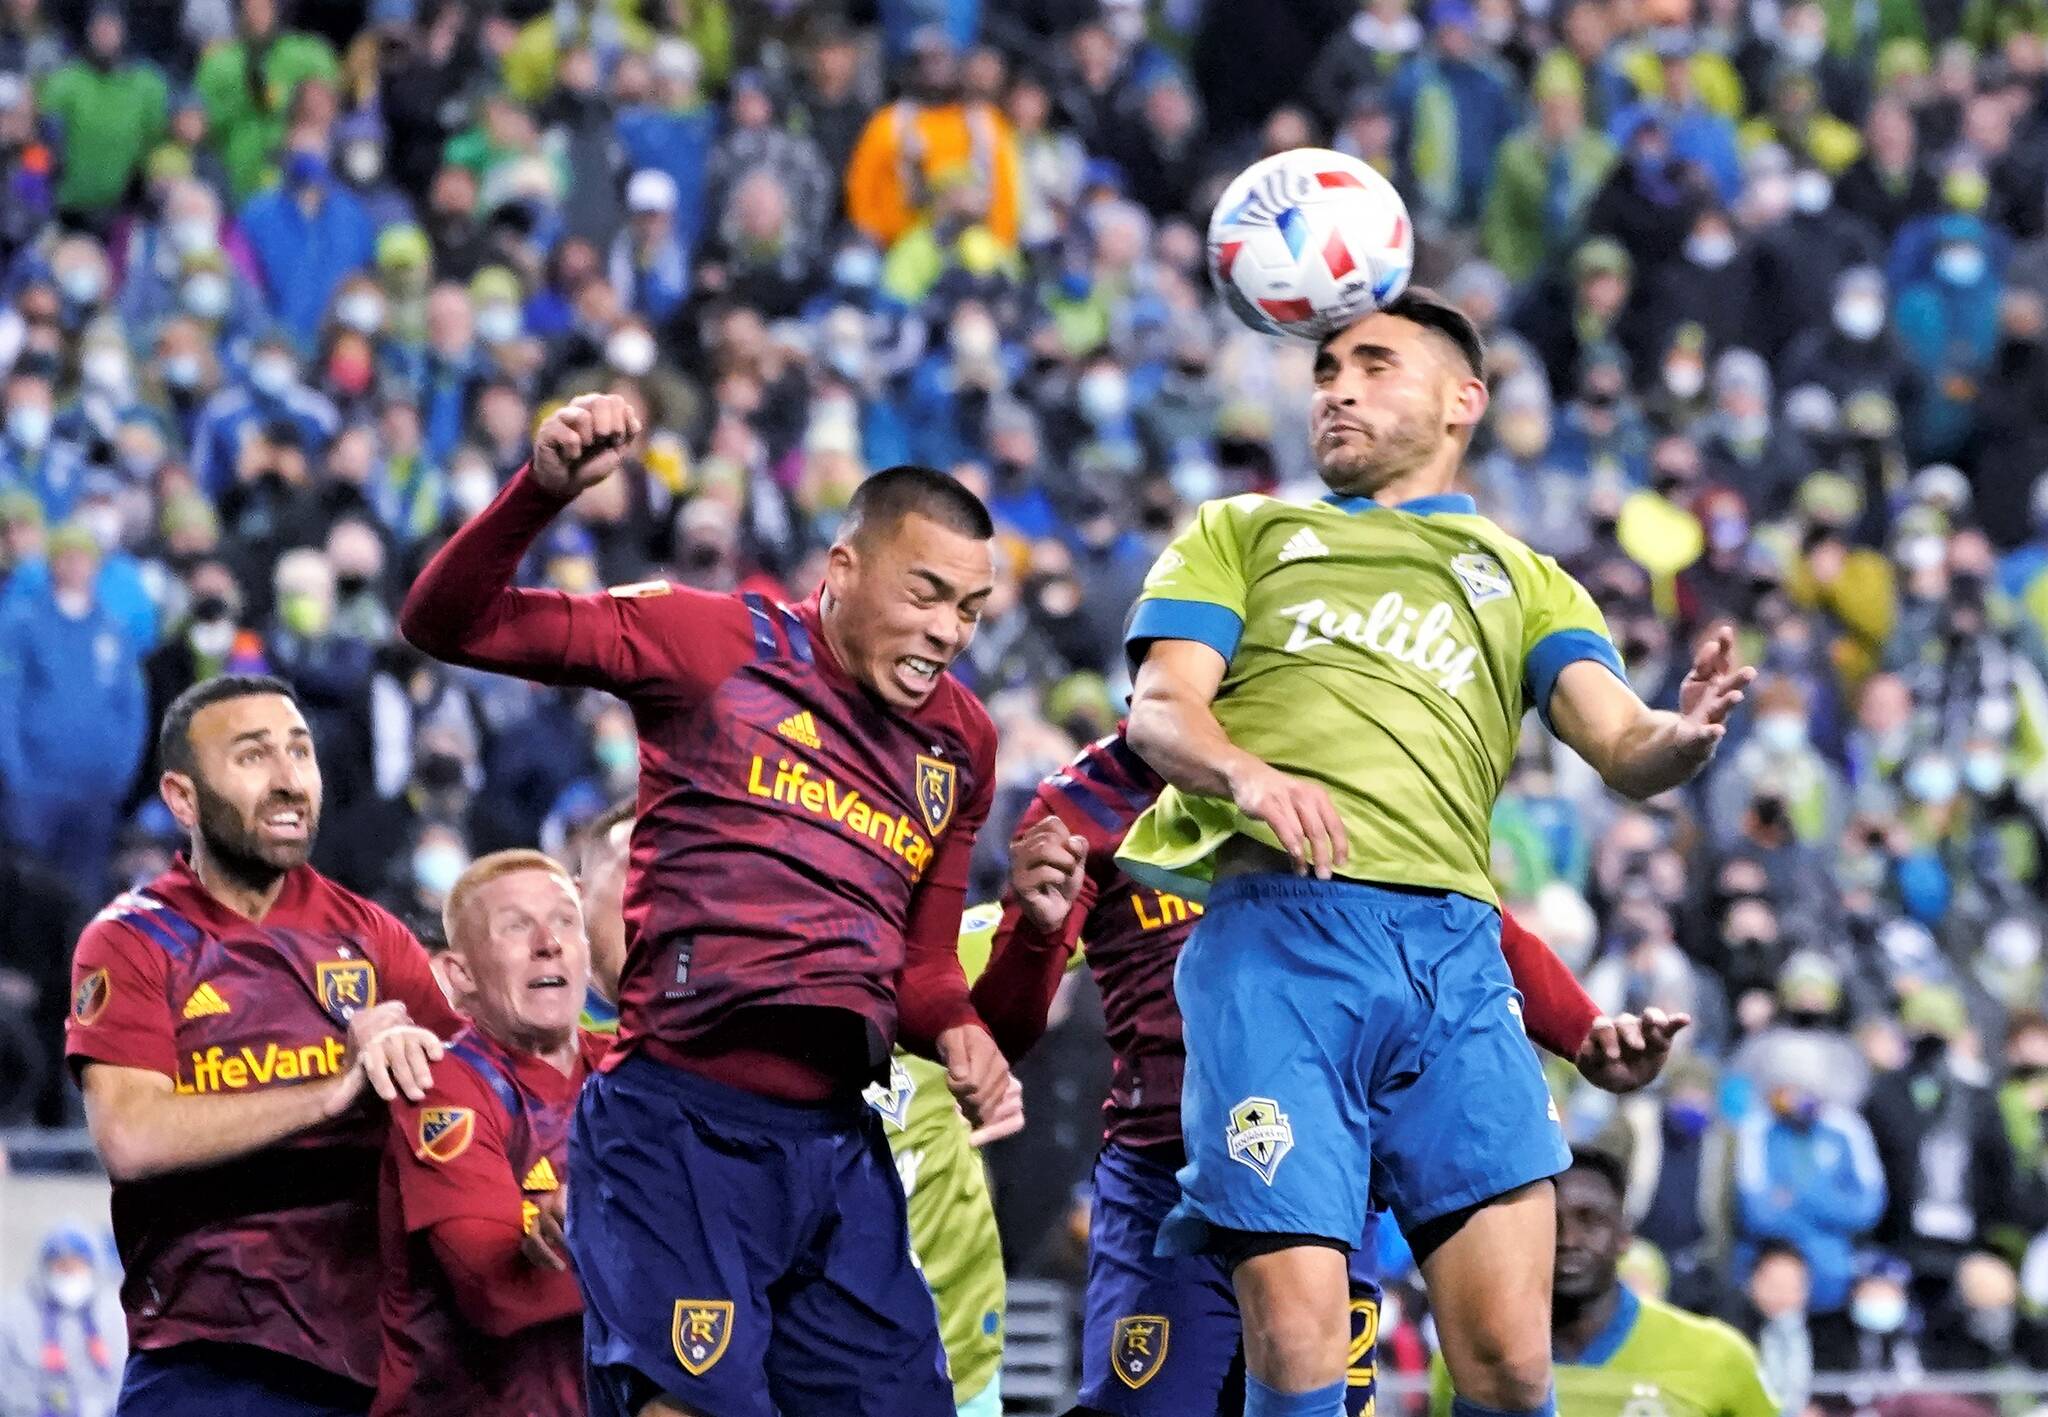 Seattle Sounders’ Cristian Roldan, right, heads the ball on a corner kick against Real Salt Lake during the second half of an MLS first-round playoff soccer match Tuesda in Seattle. (AP Photo/Ted S. Warren)